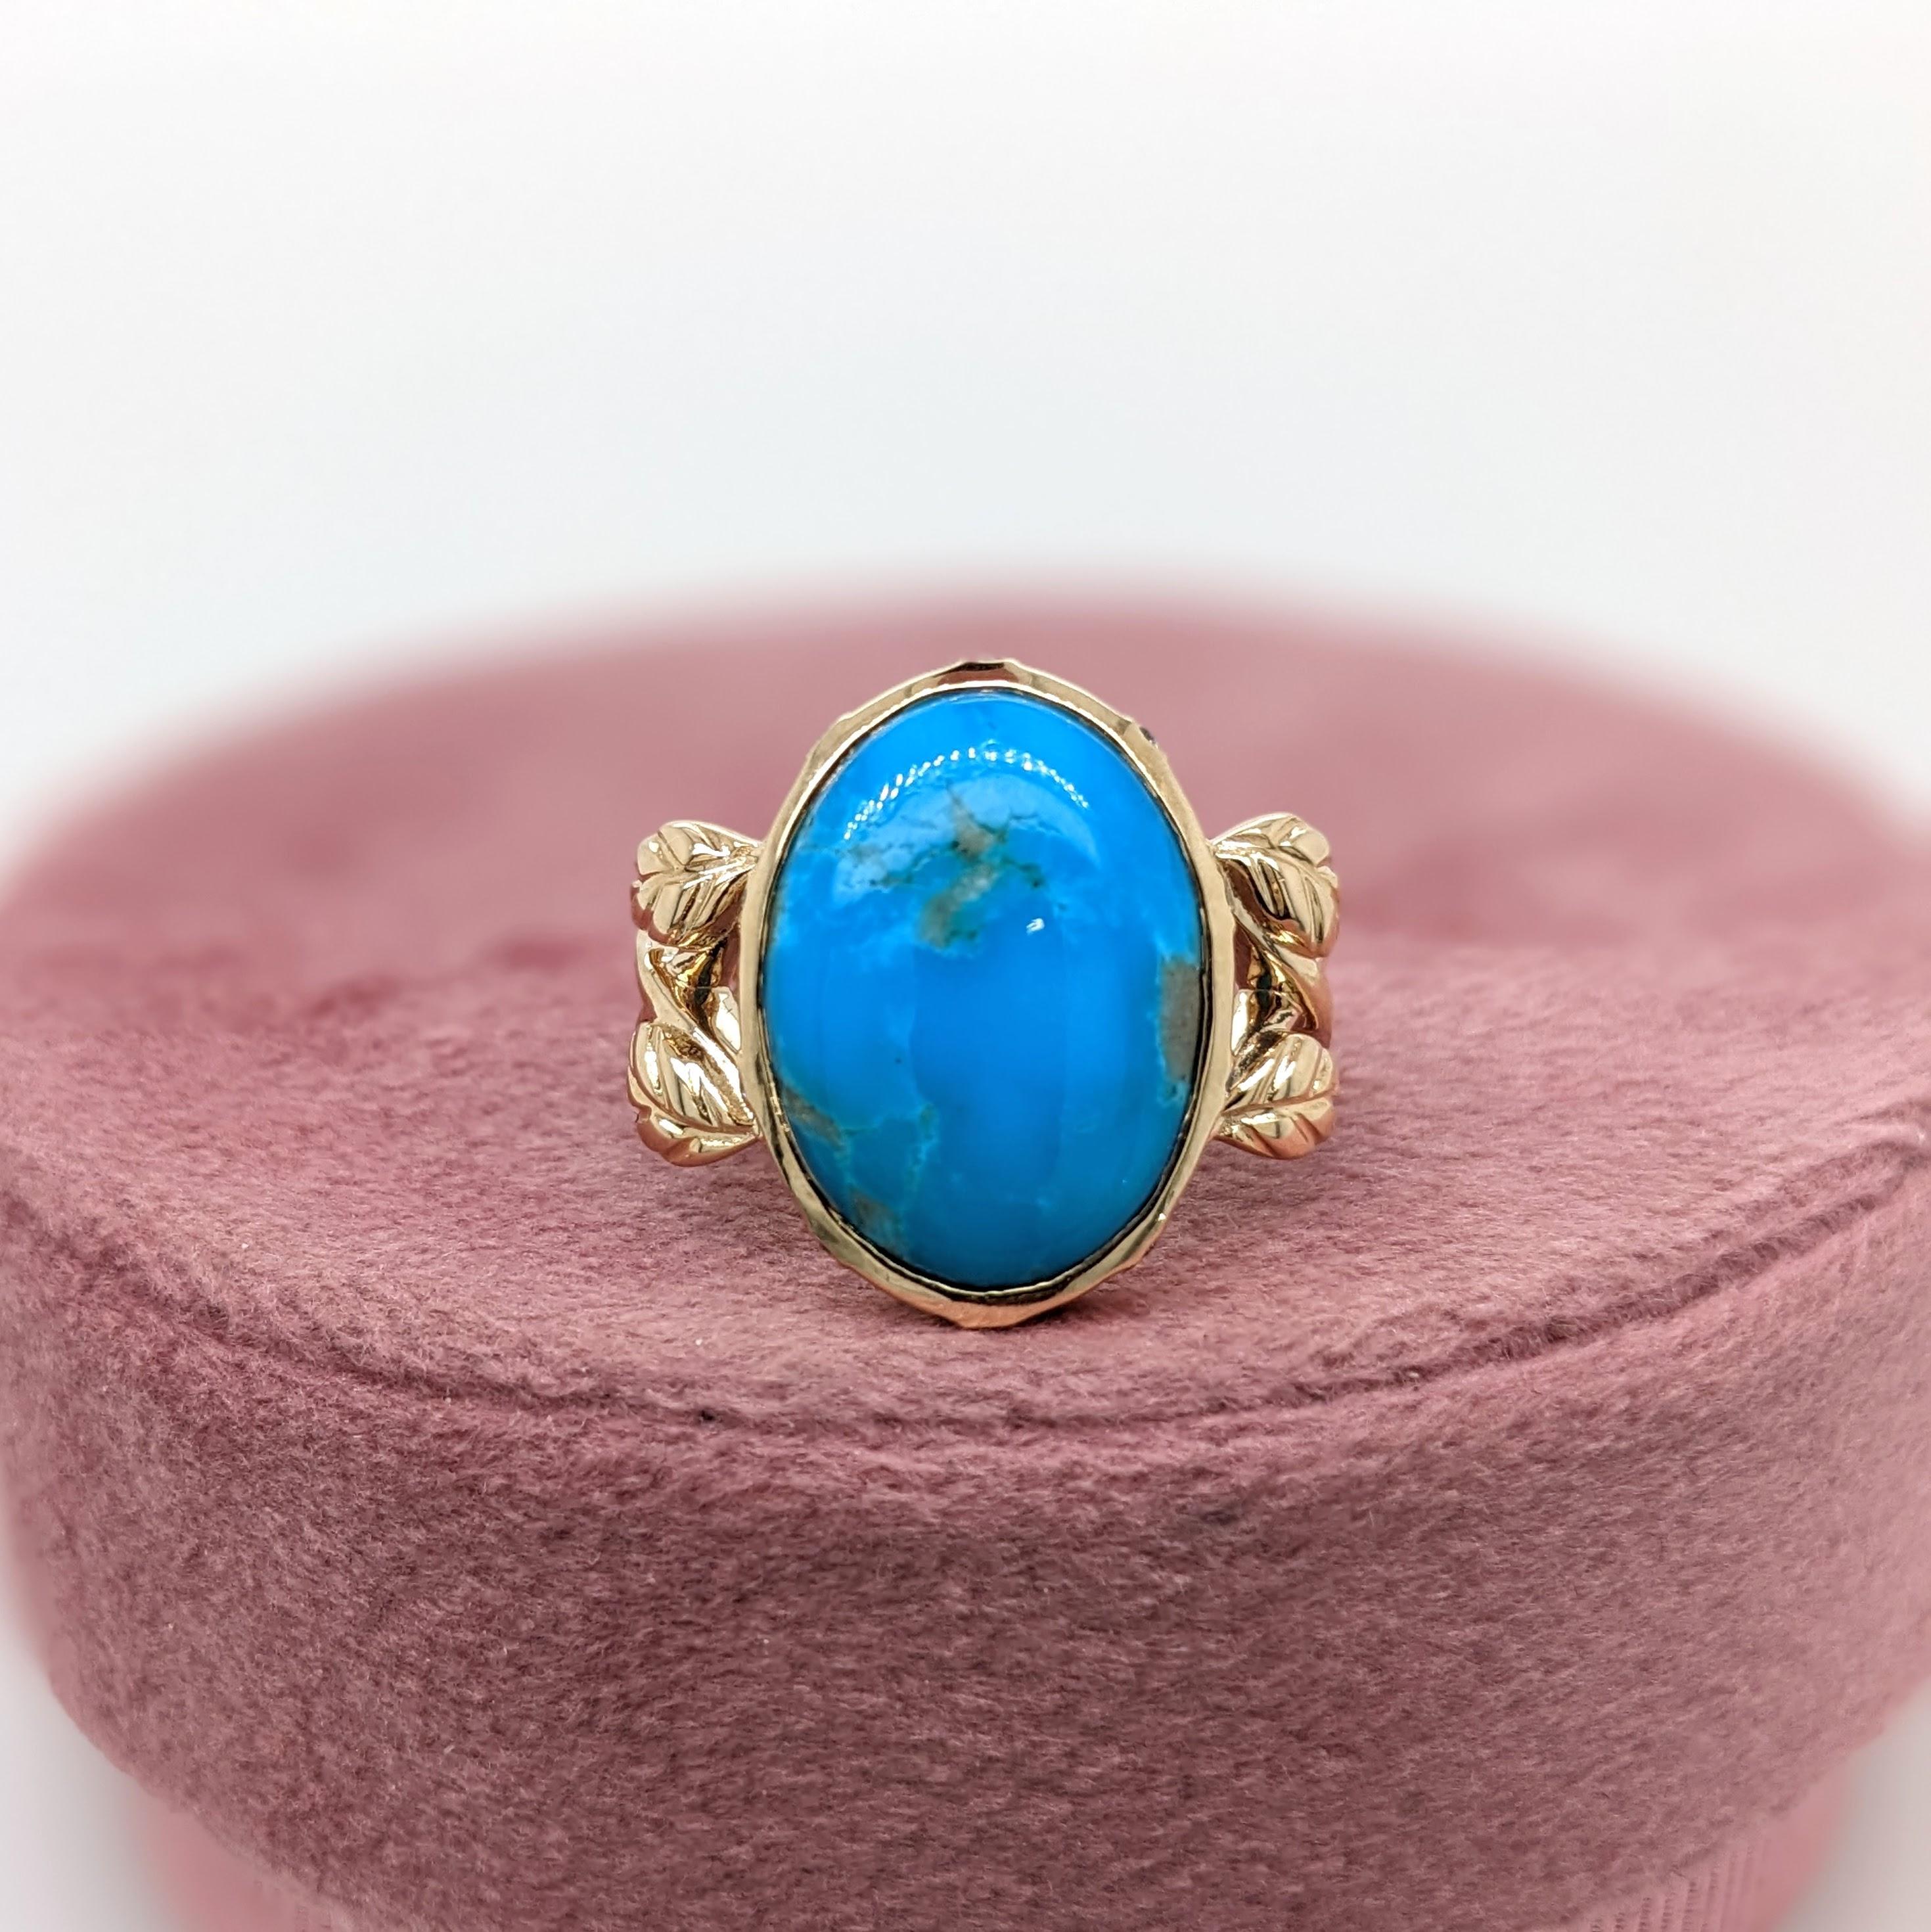 This 14k solid Gold ring features a beautiful 16x12mm Turquoise center stone with a Milgrain detail split shank. This unique piece is perfect for daily wear.

Specifications: 

Item Type: Ring
Centre Stone: Turquoise
Treatment: None
Weight: 5.34